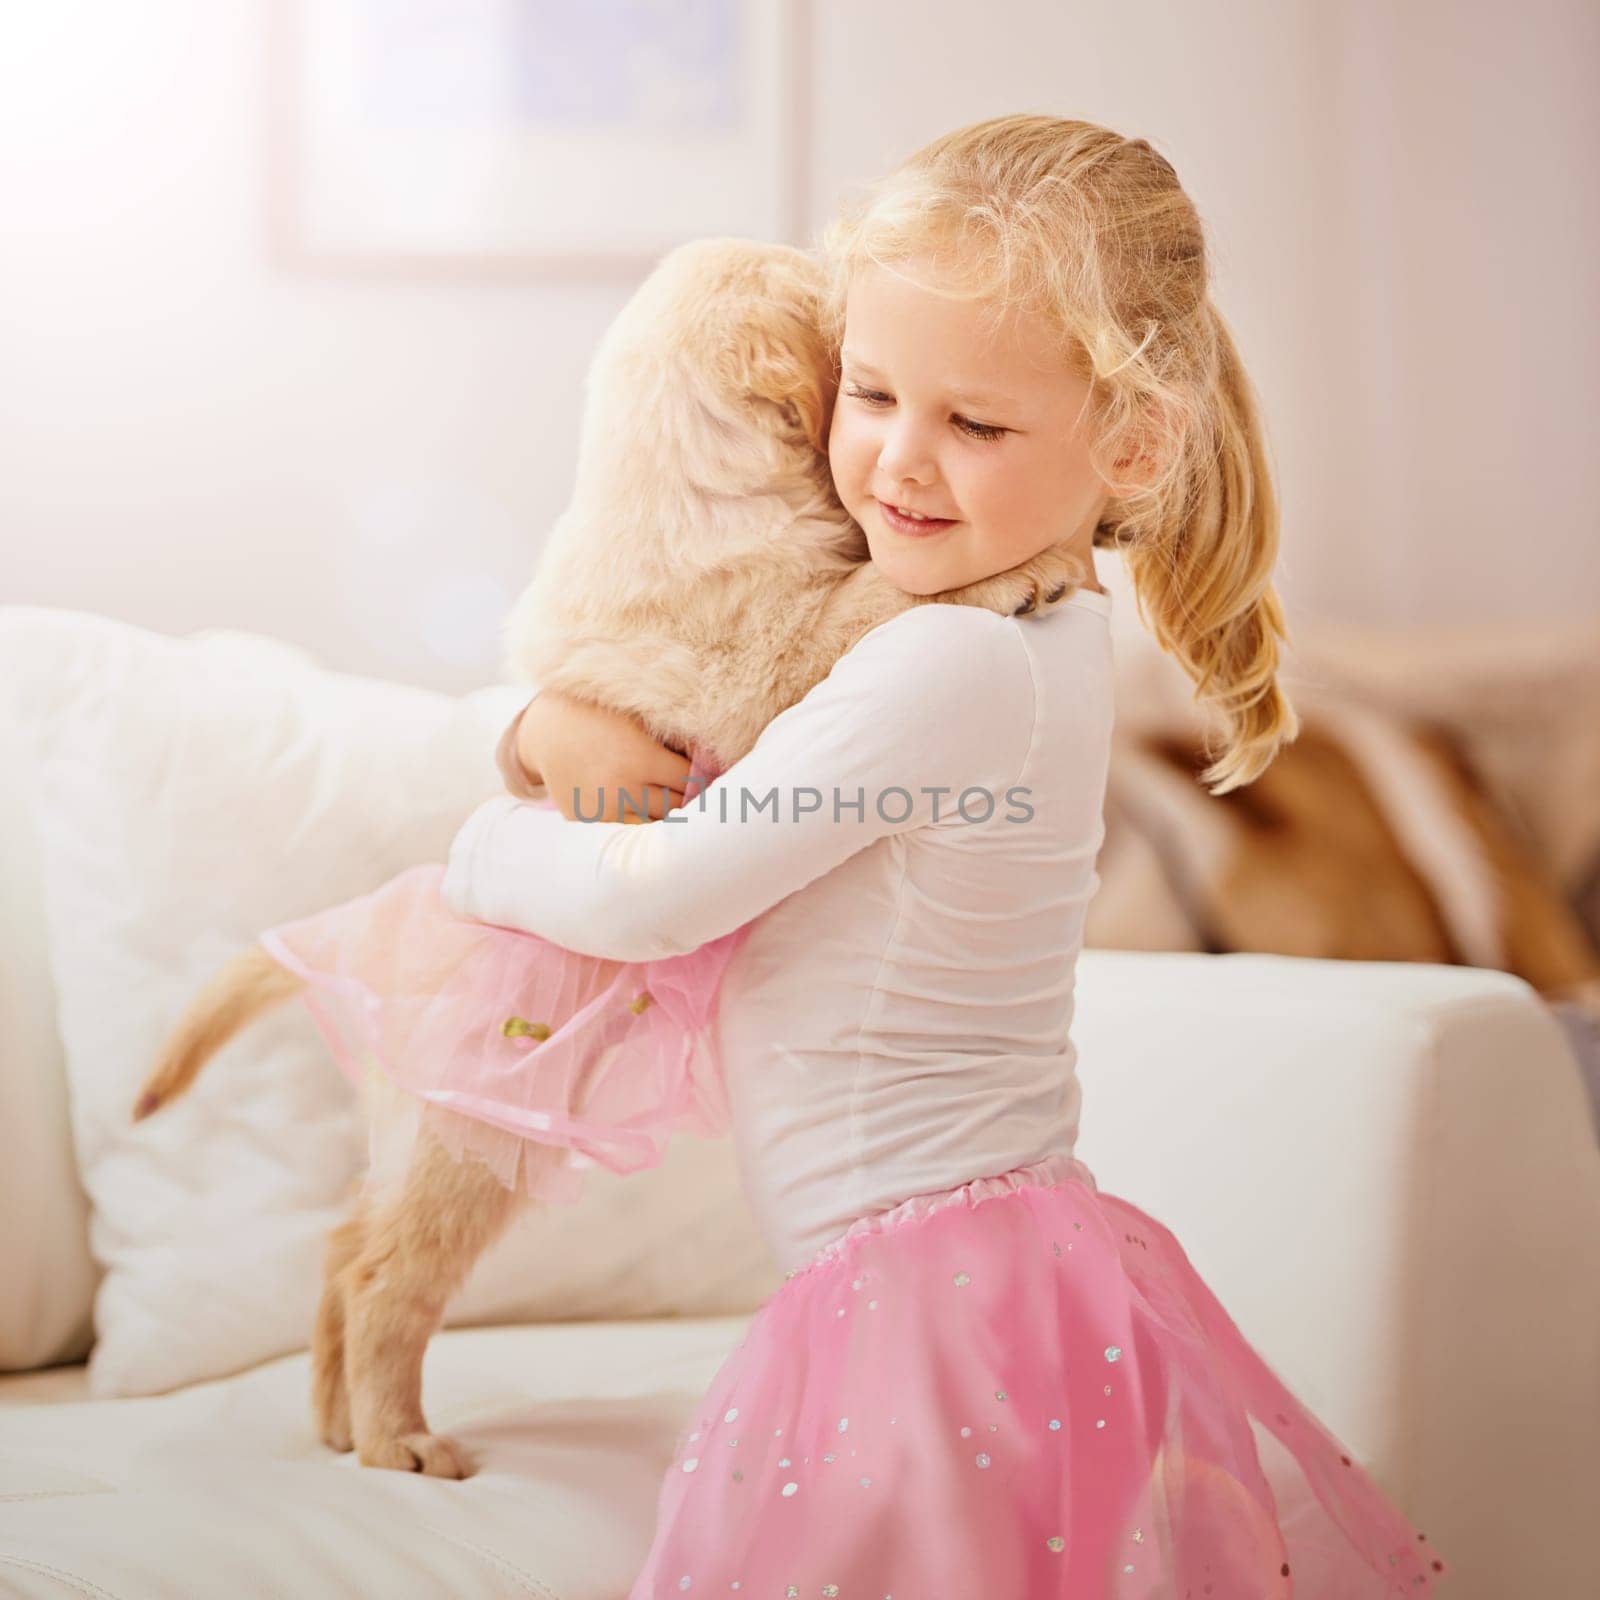 Child, golden retriever or dog in a house to hug for love, care and development. Face of a cute girl kid and animal puppy or pet in a tutu playing together as friends on the lounge sofa for happiness by YuriArcurs